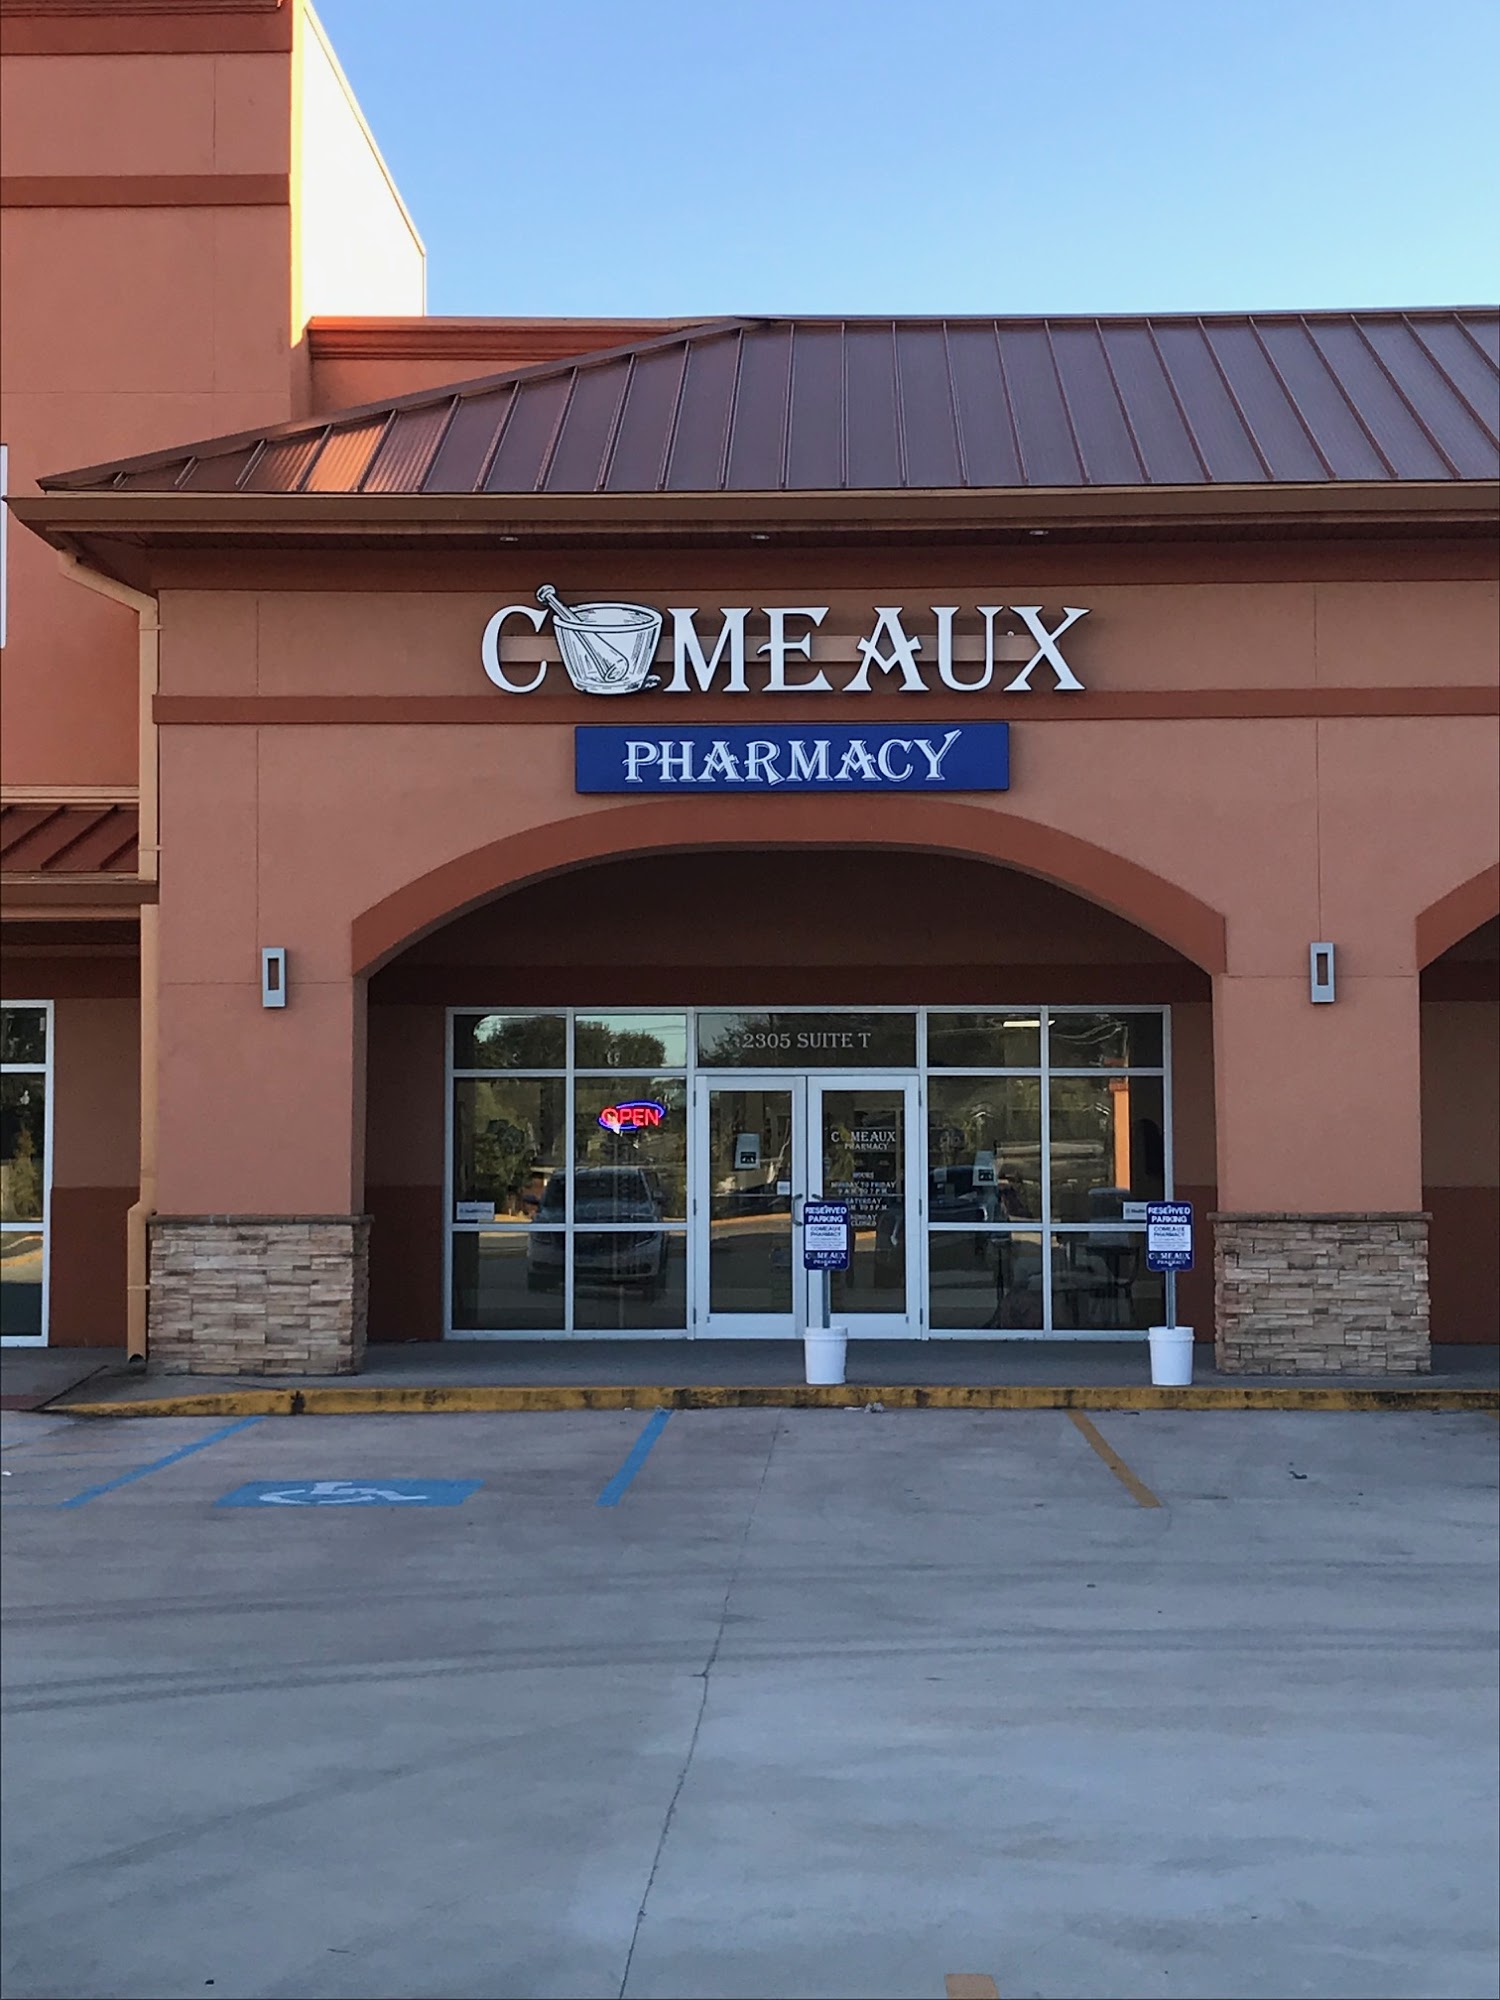 Comeaux Pharmacy